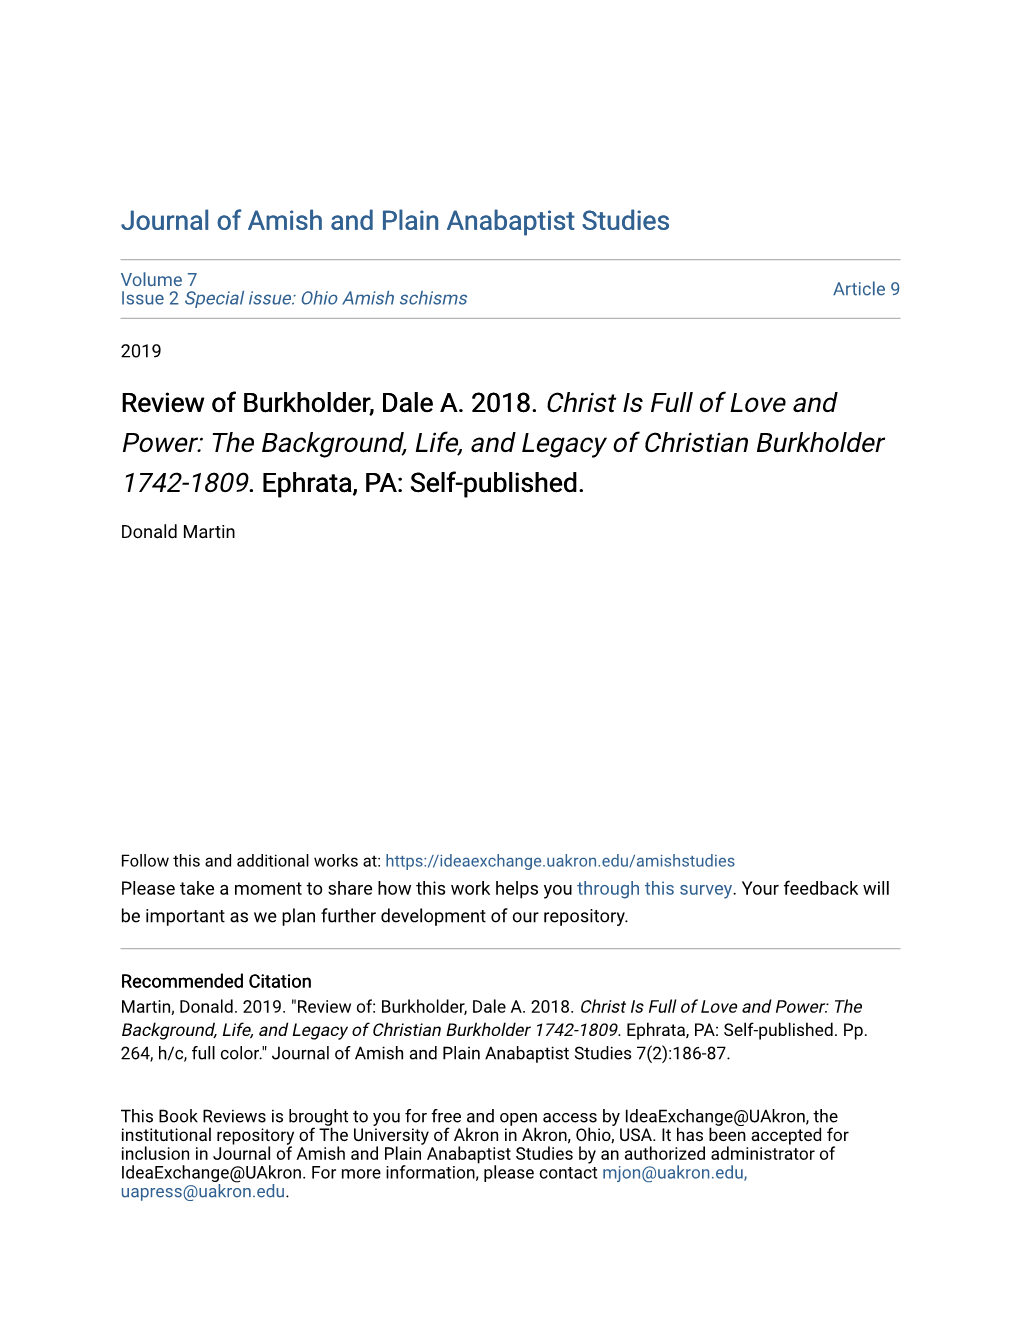 Review of Burkholder, Dale A. 2018. Christ Is Full of Love and Power: the Background, Life, and Legacy of Christian Burkholder 1742-1809